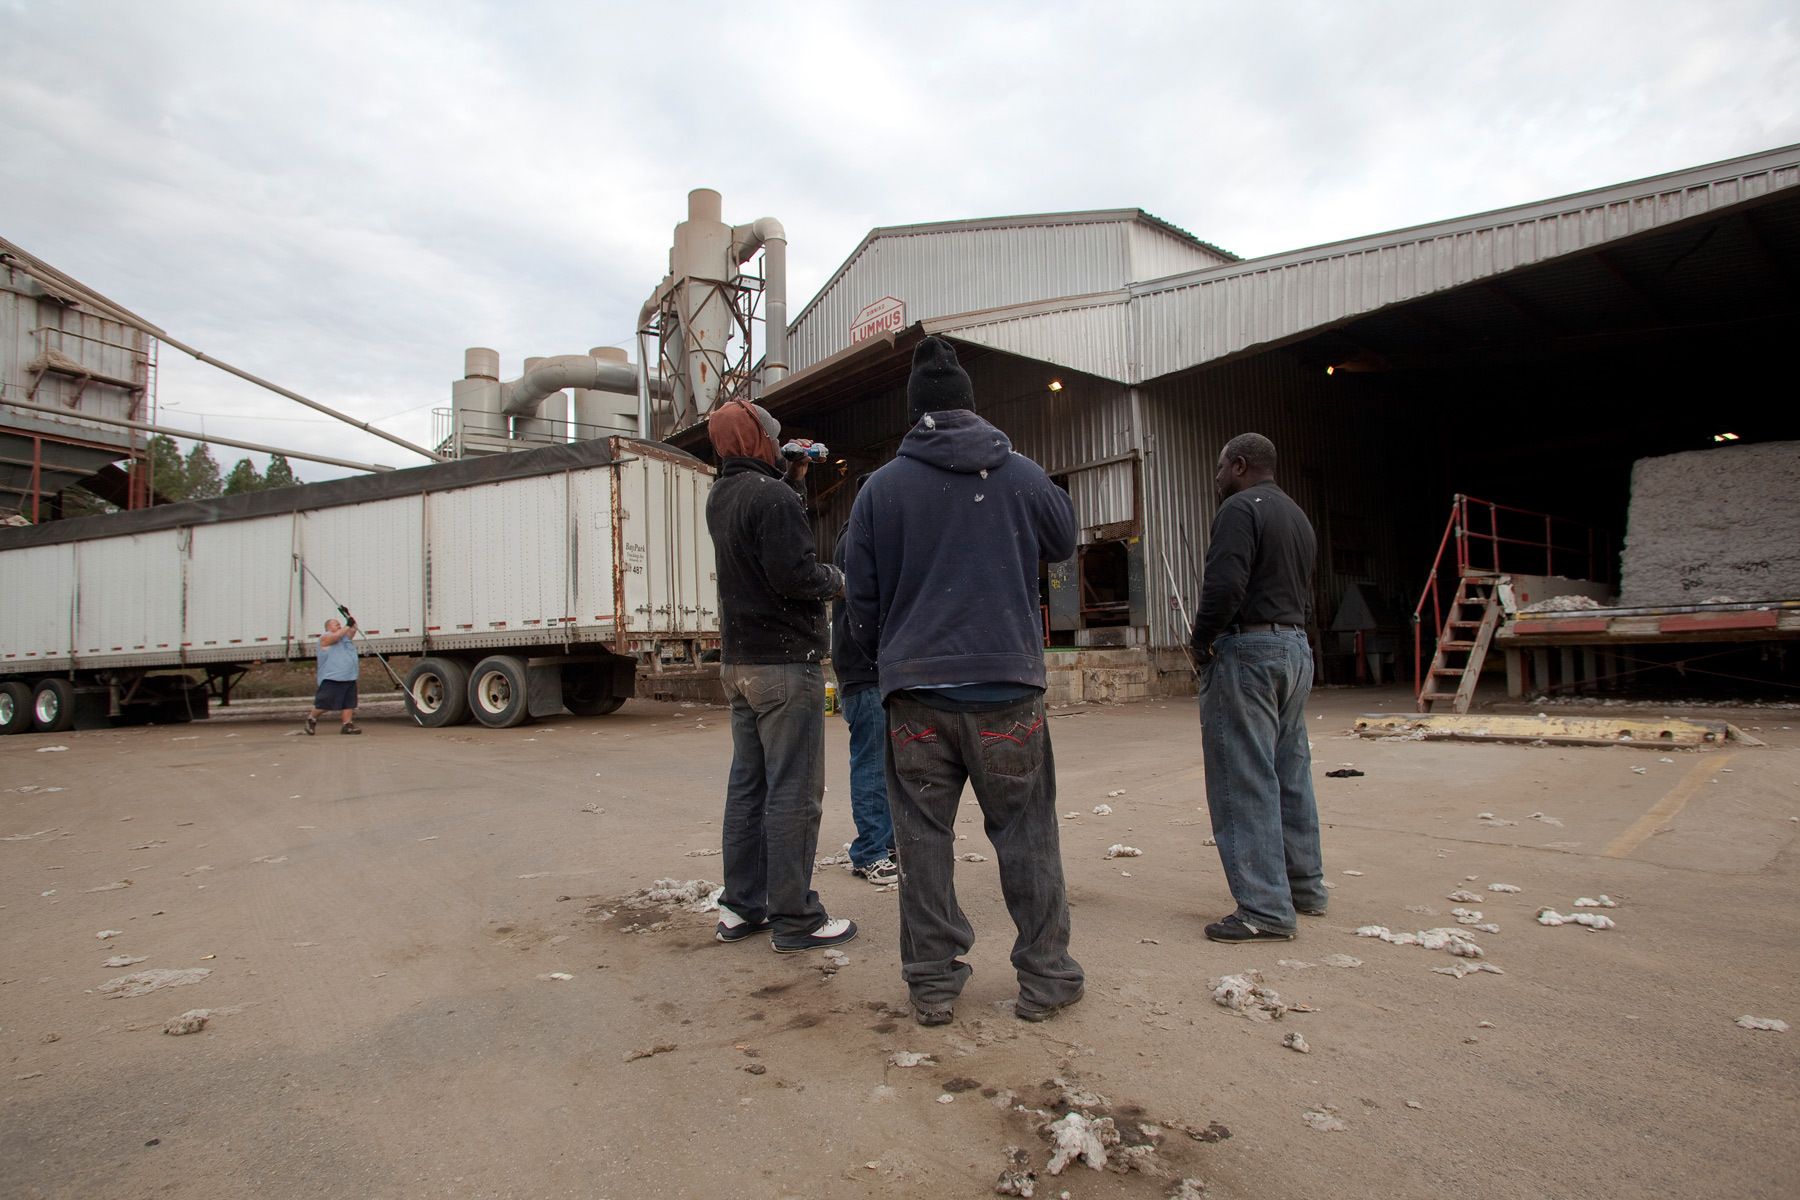 Baggers stand outside the Minturn Cotton Company during a break in production in Minturn, South Carolina November 27, 2012. The facility gins cotton after it is harvested to remove the seeds and clean the cotton for shipment. About 80 percent of the cotton ginned at this facility is exported outside the U.S.    REUTERS/Randall Hill (UNITED STATES)